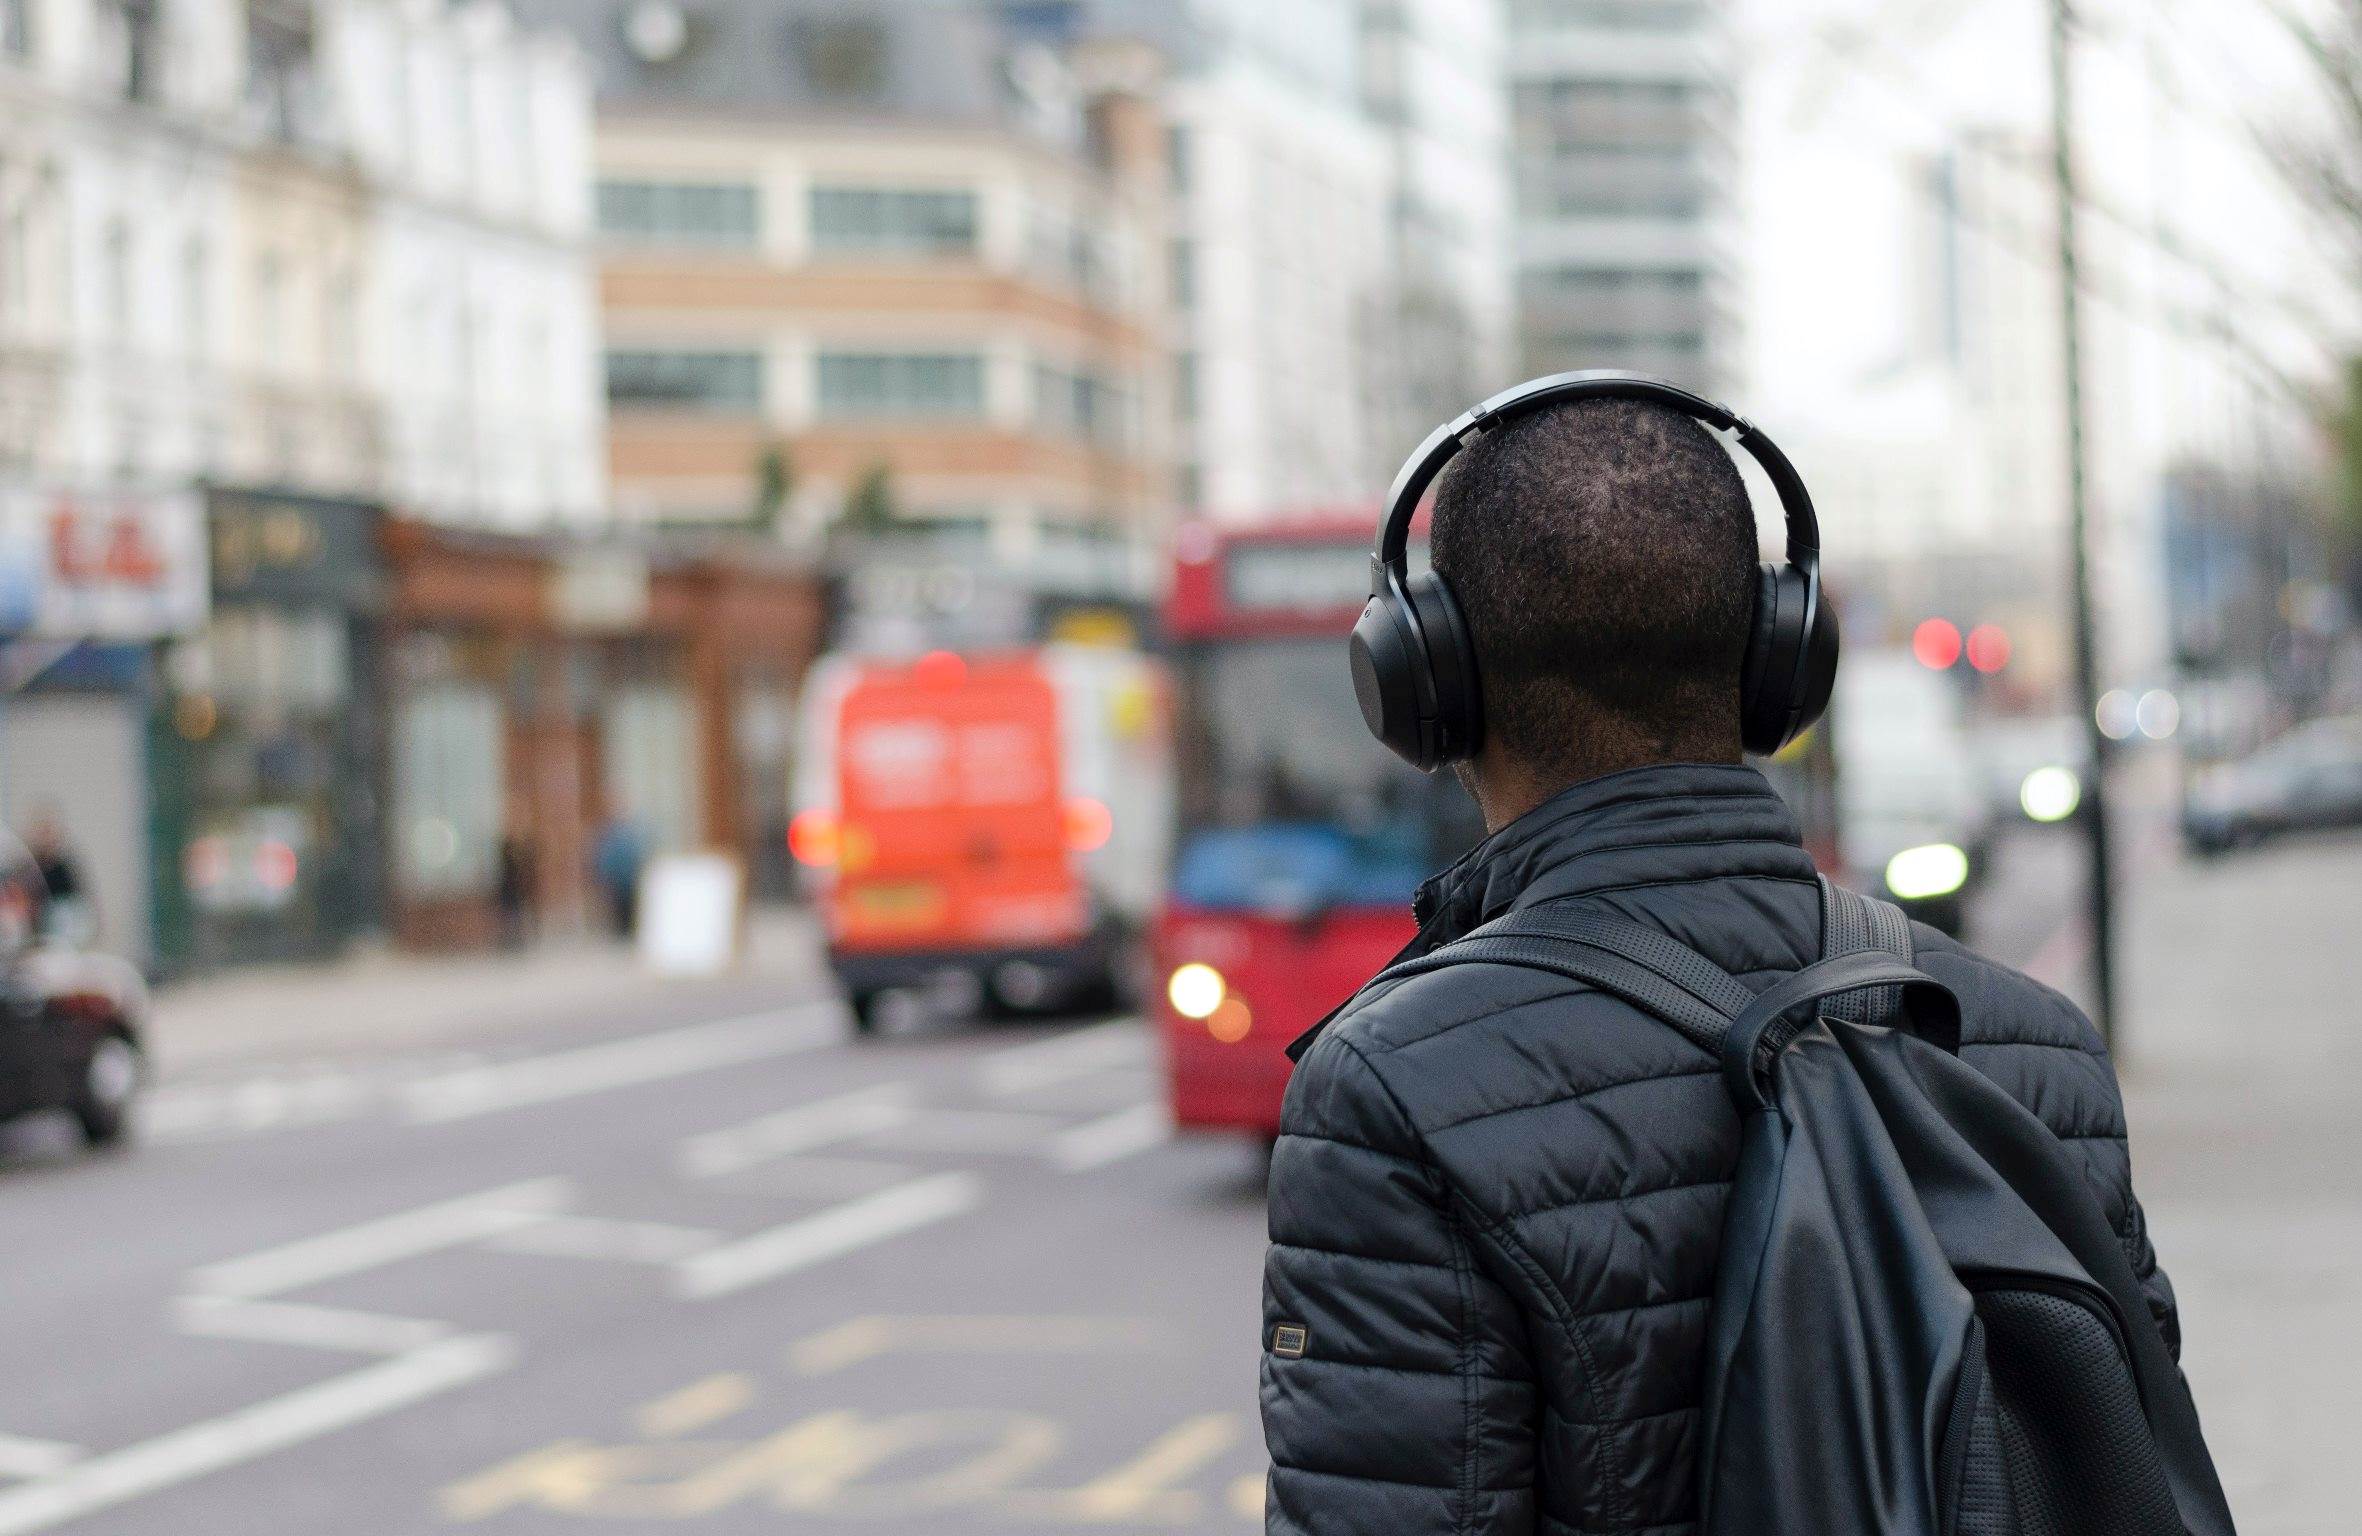 Person with headphones at a bus stop